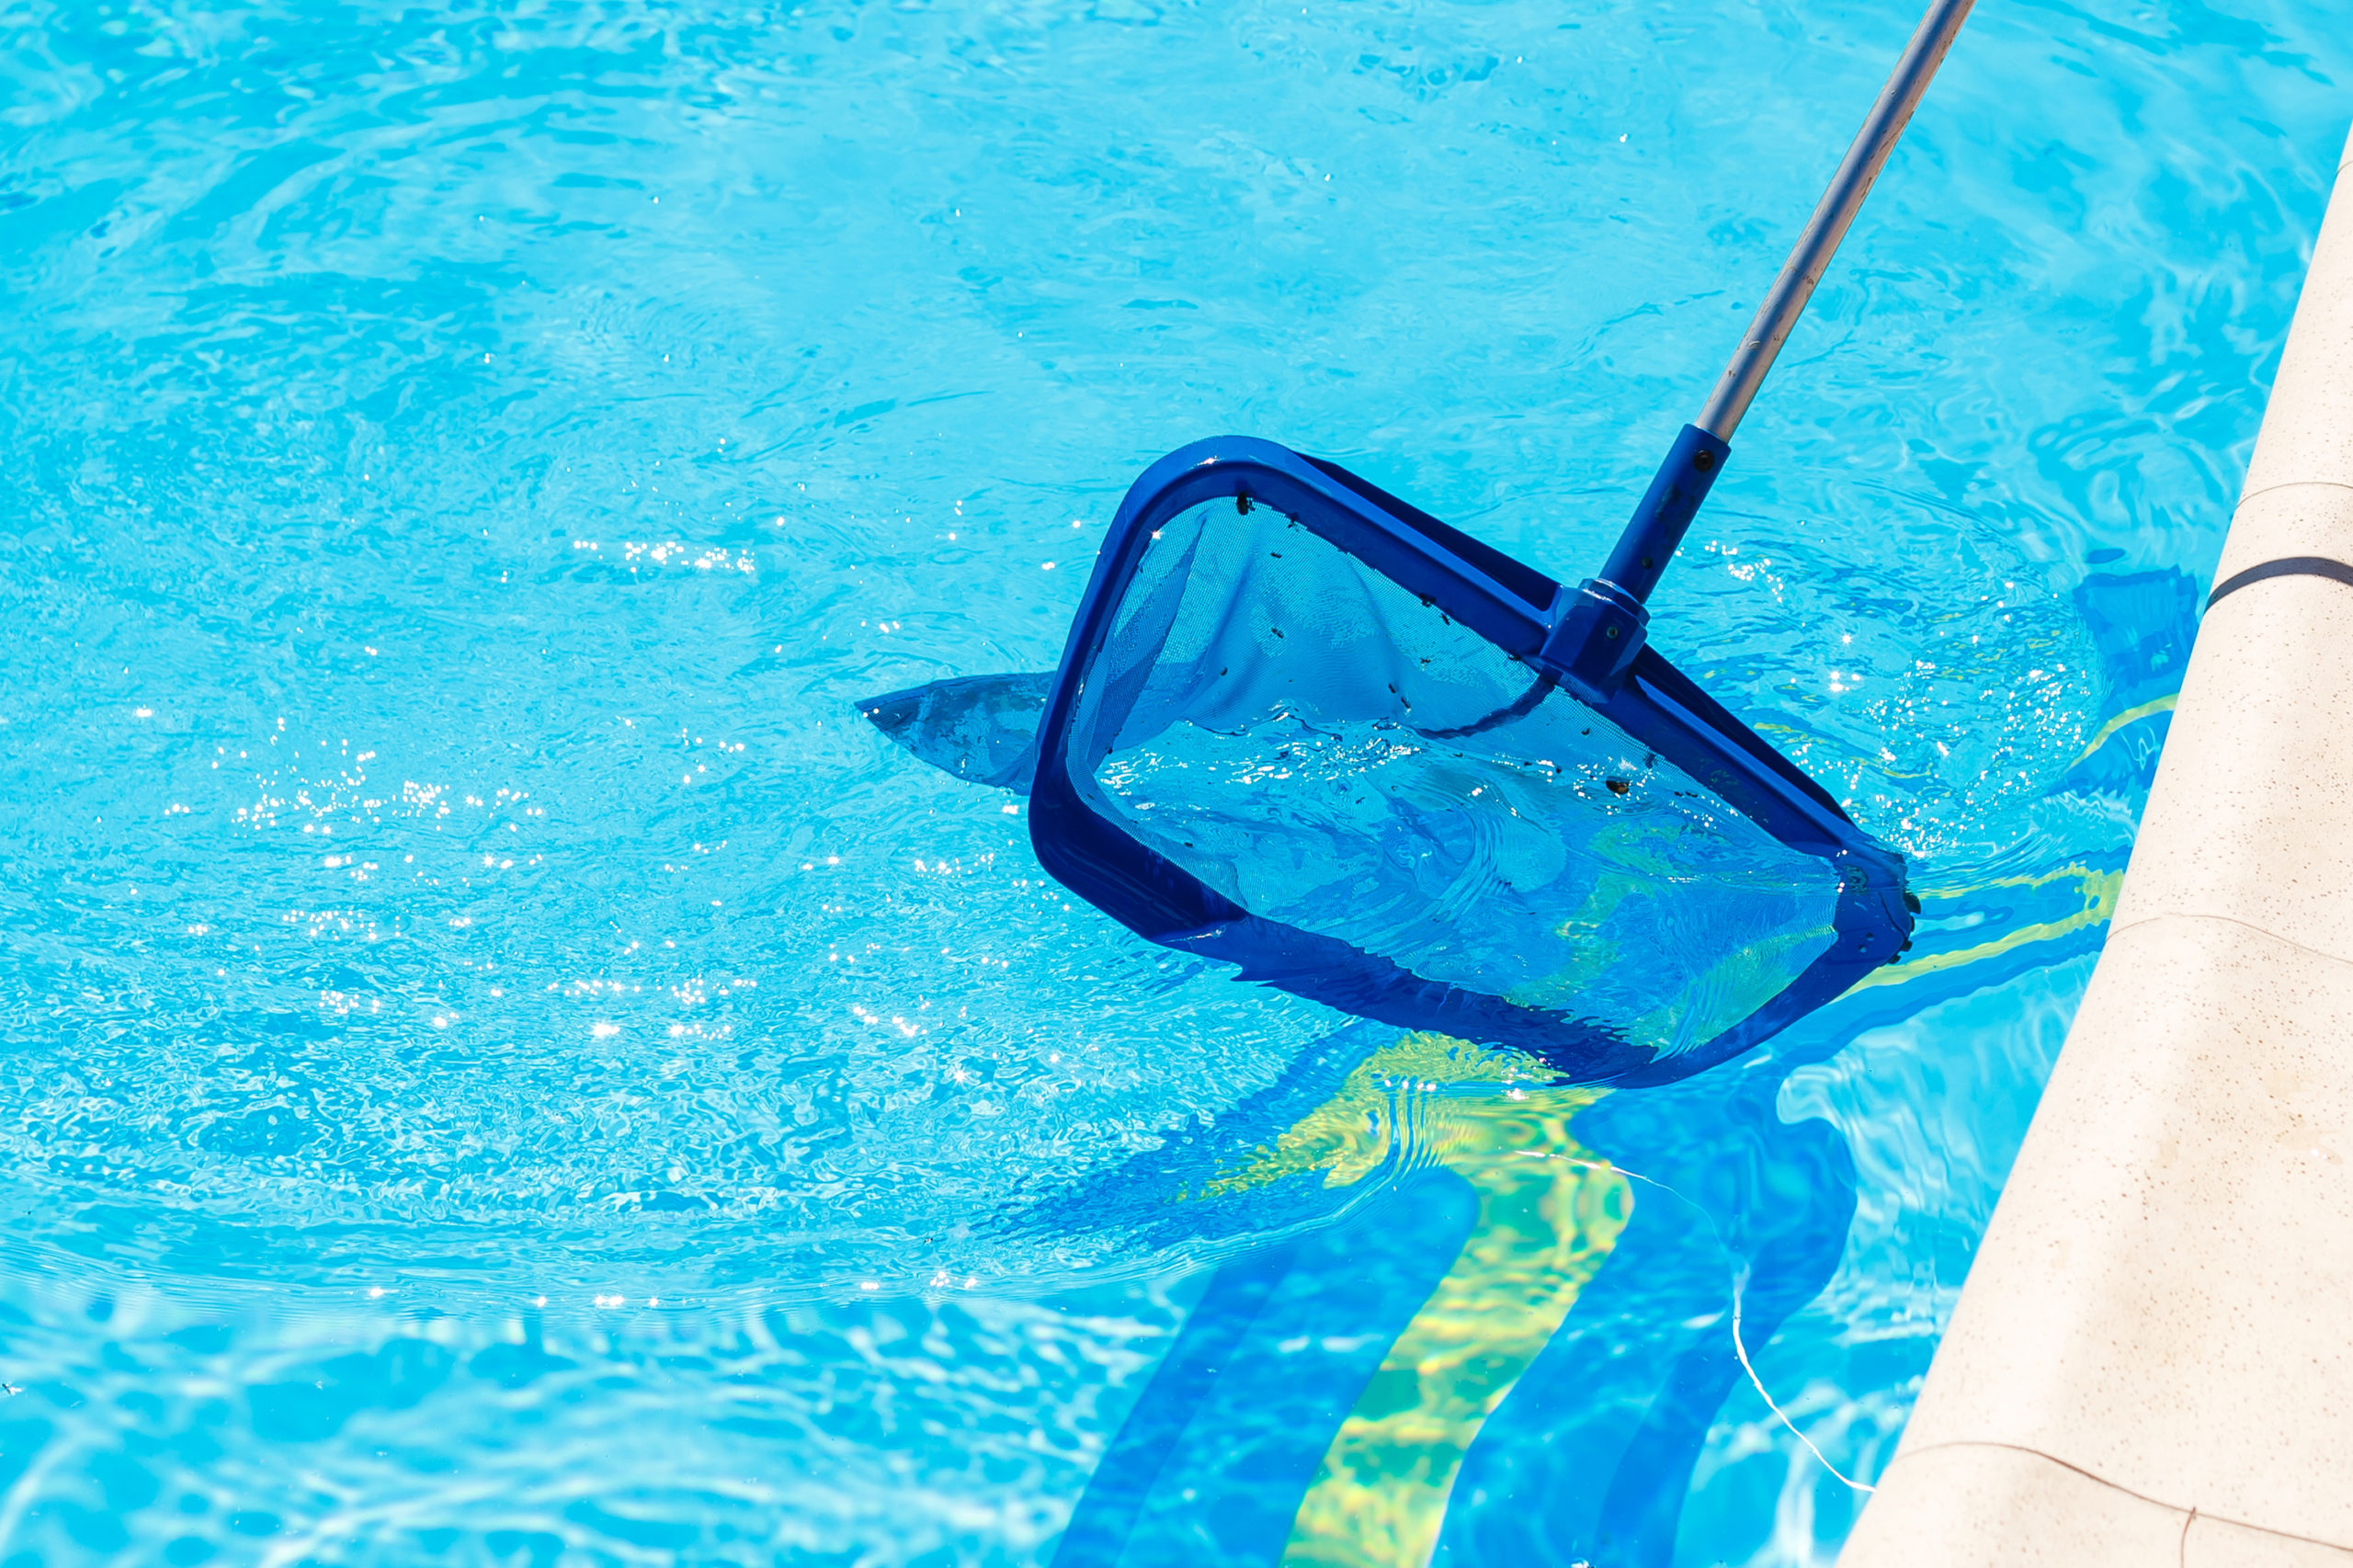 A pool scoop net used to remove leaves and debris from the pool water, keeping it clean and clear.